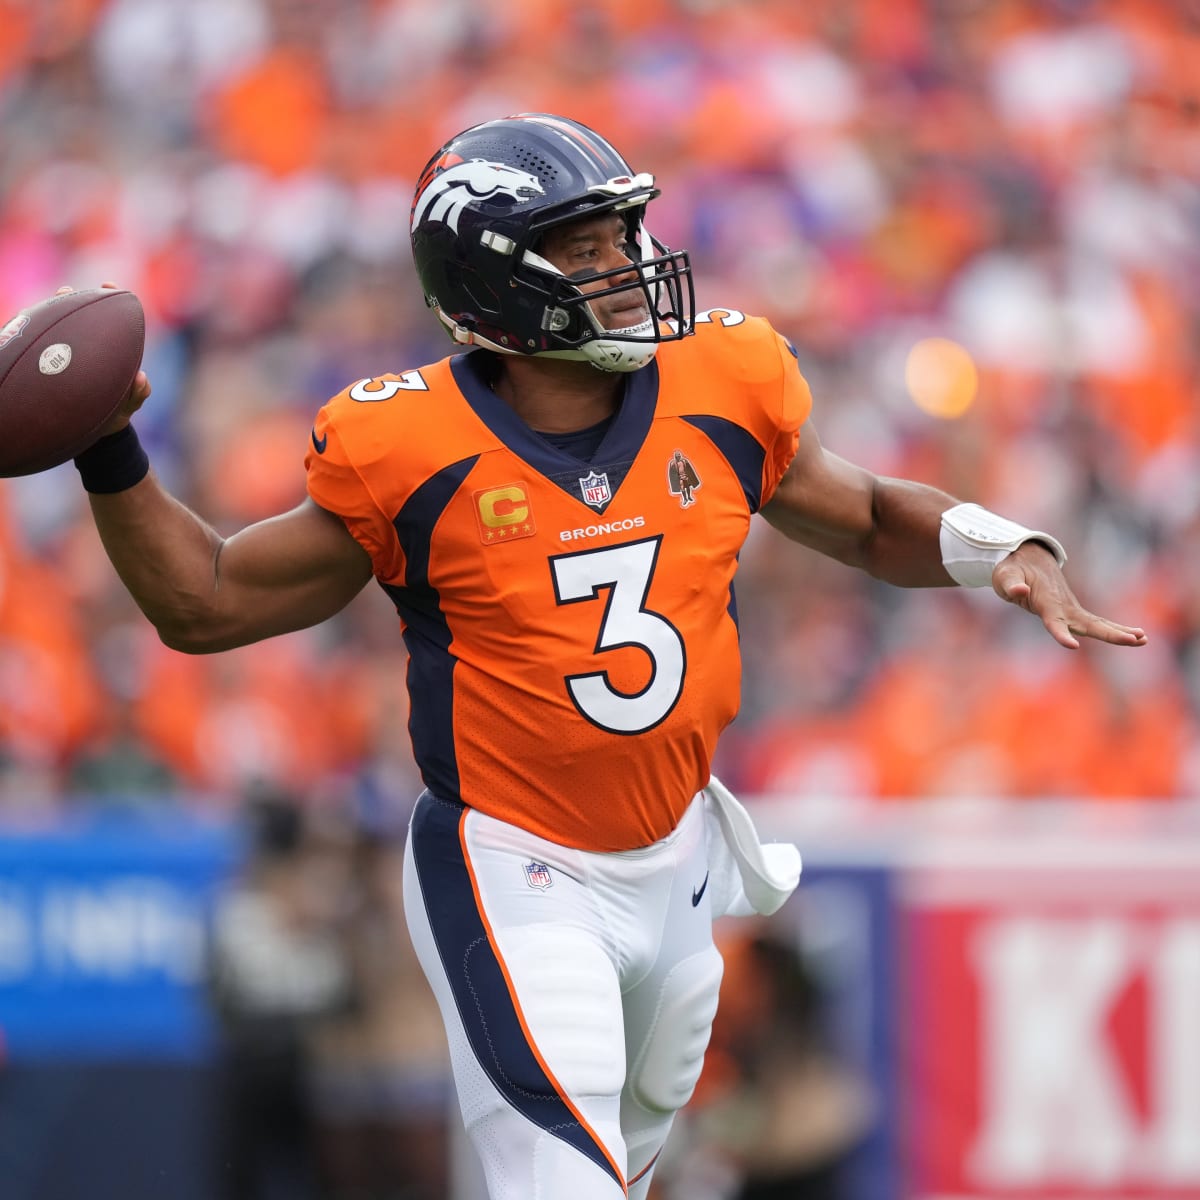 Broncos' deep receiving corps takes big hit with the loss of Tim